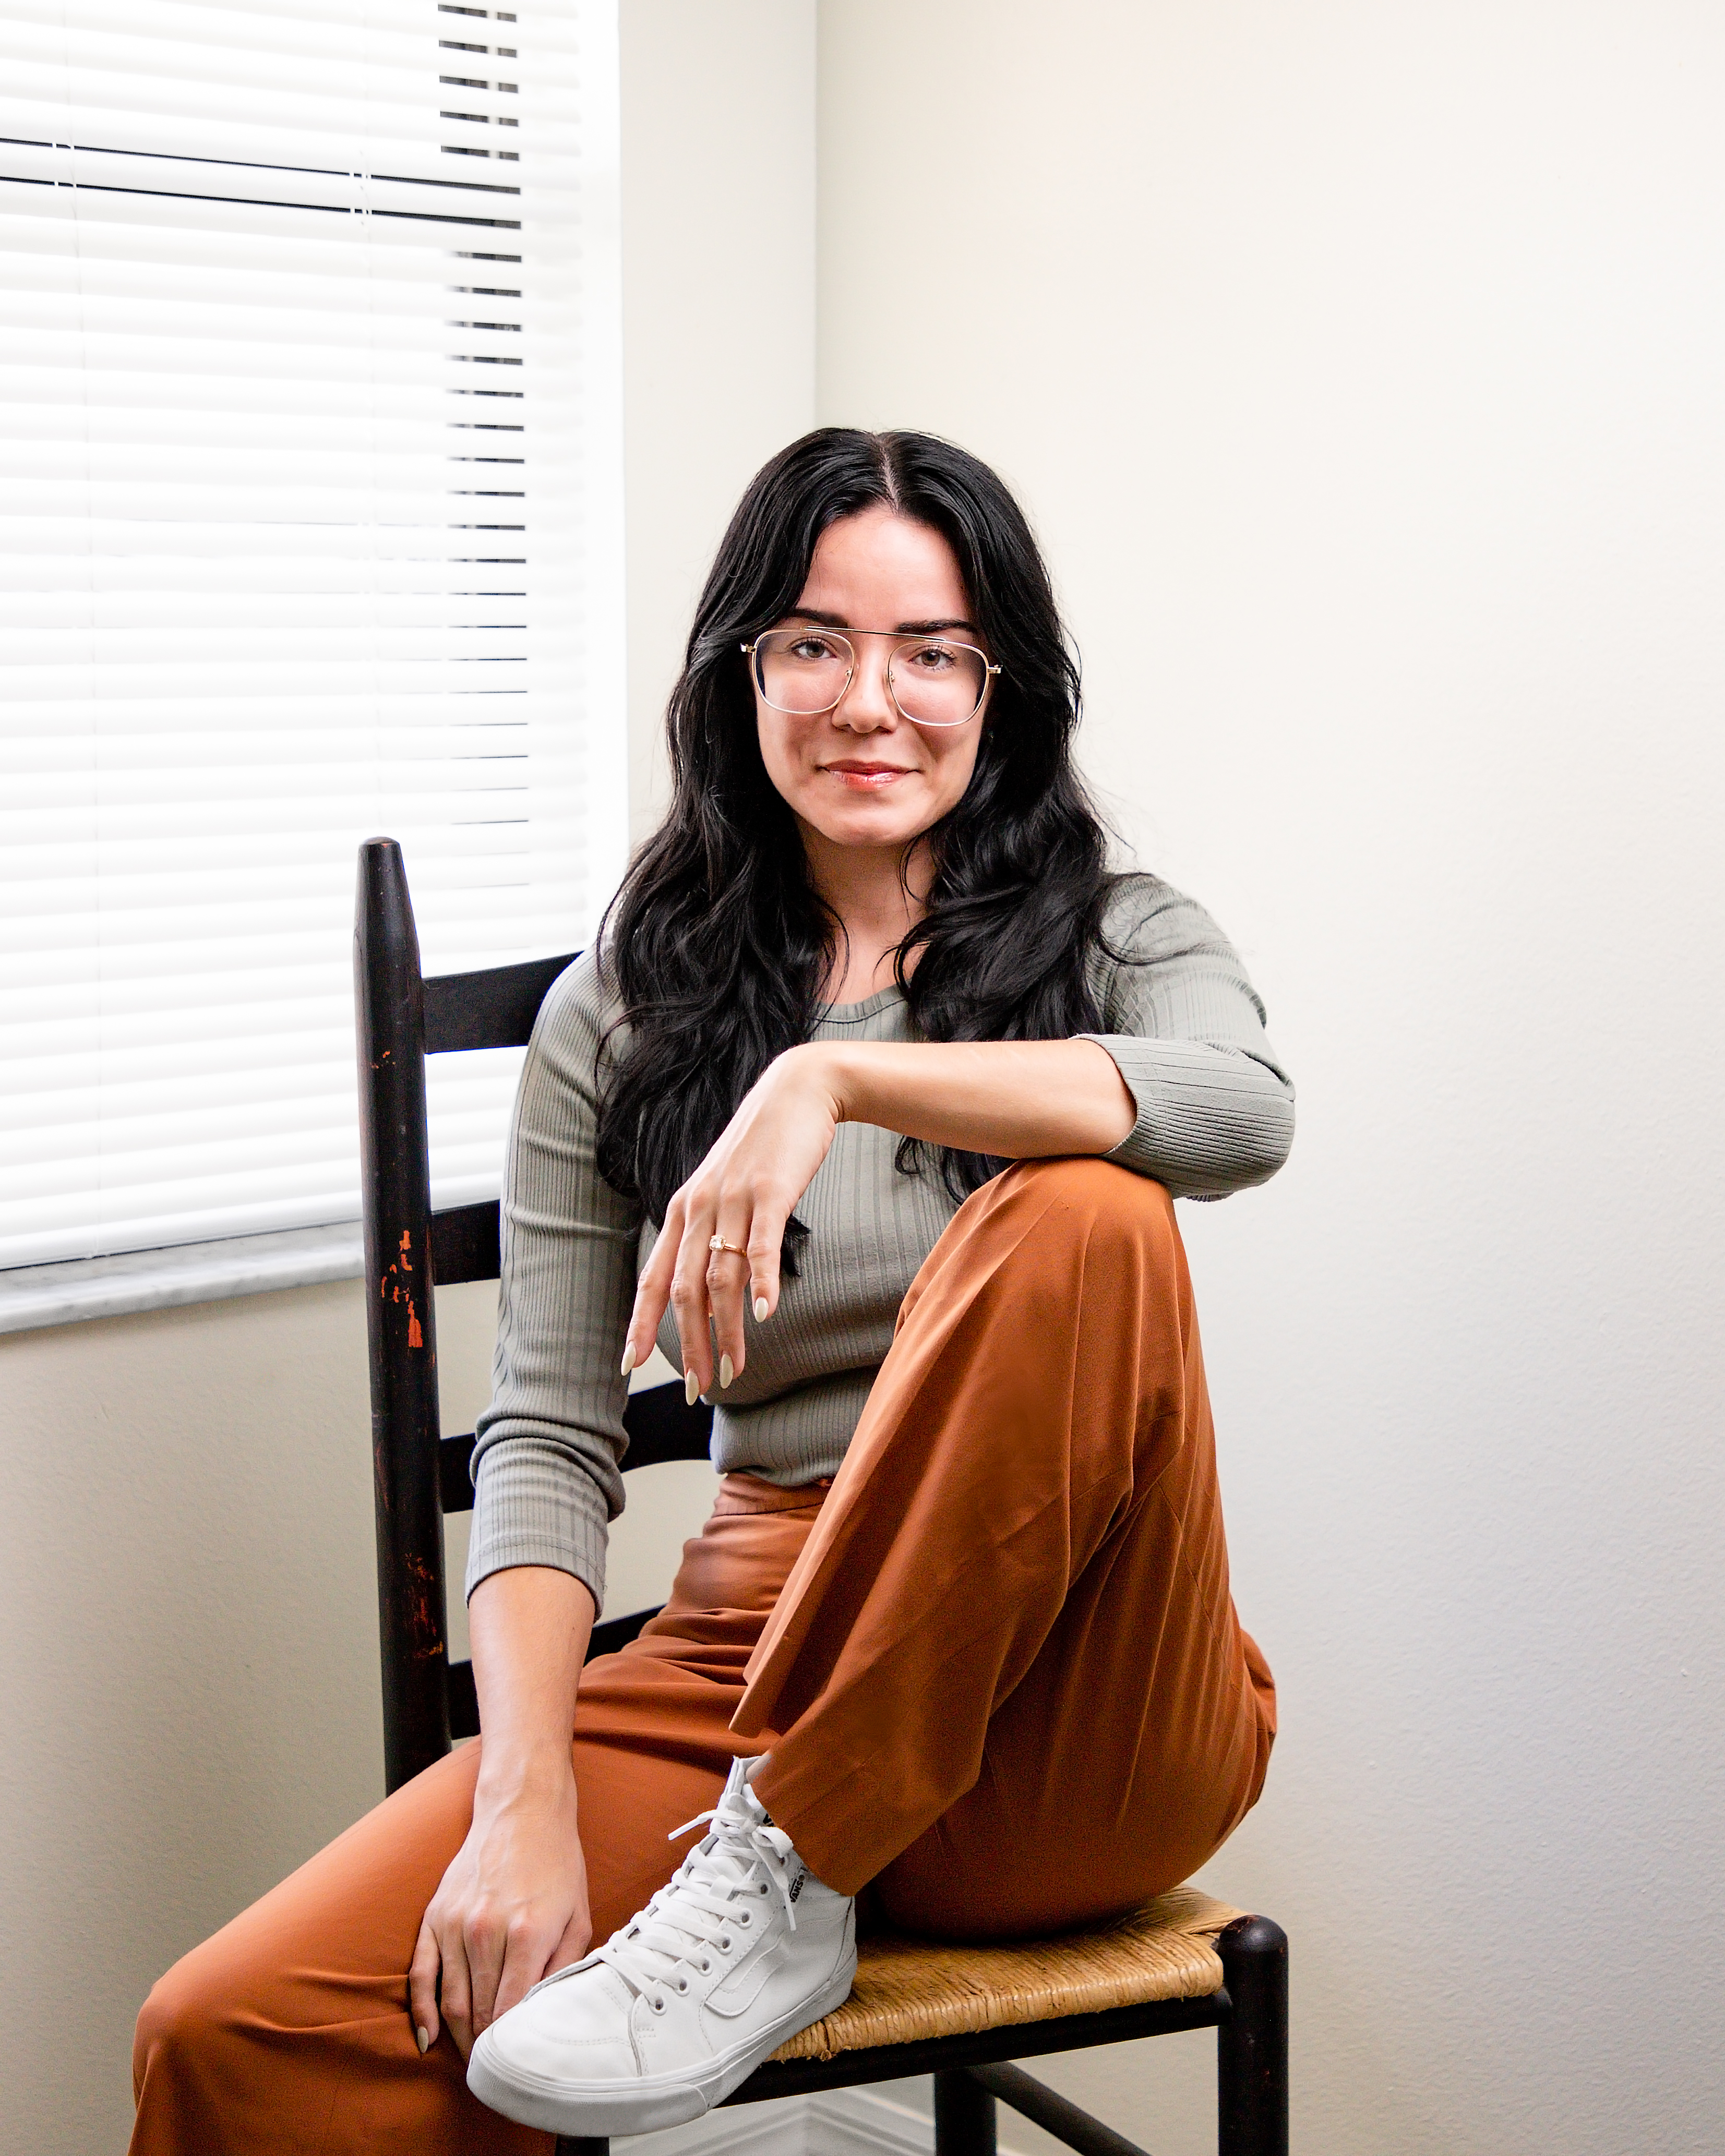 a headshot of a woman with black hair sitting on a chair